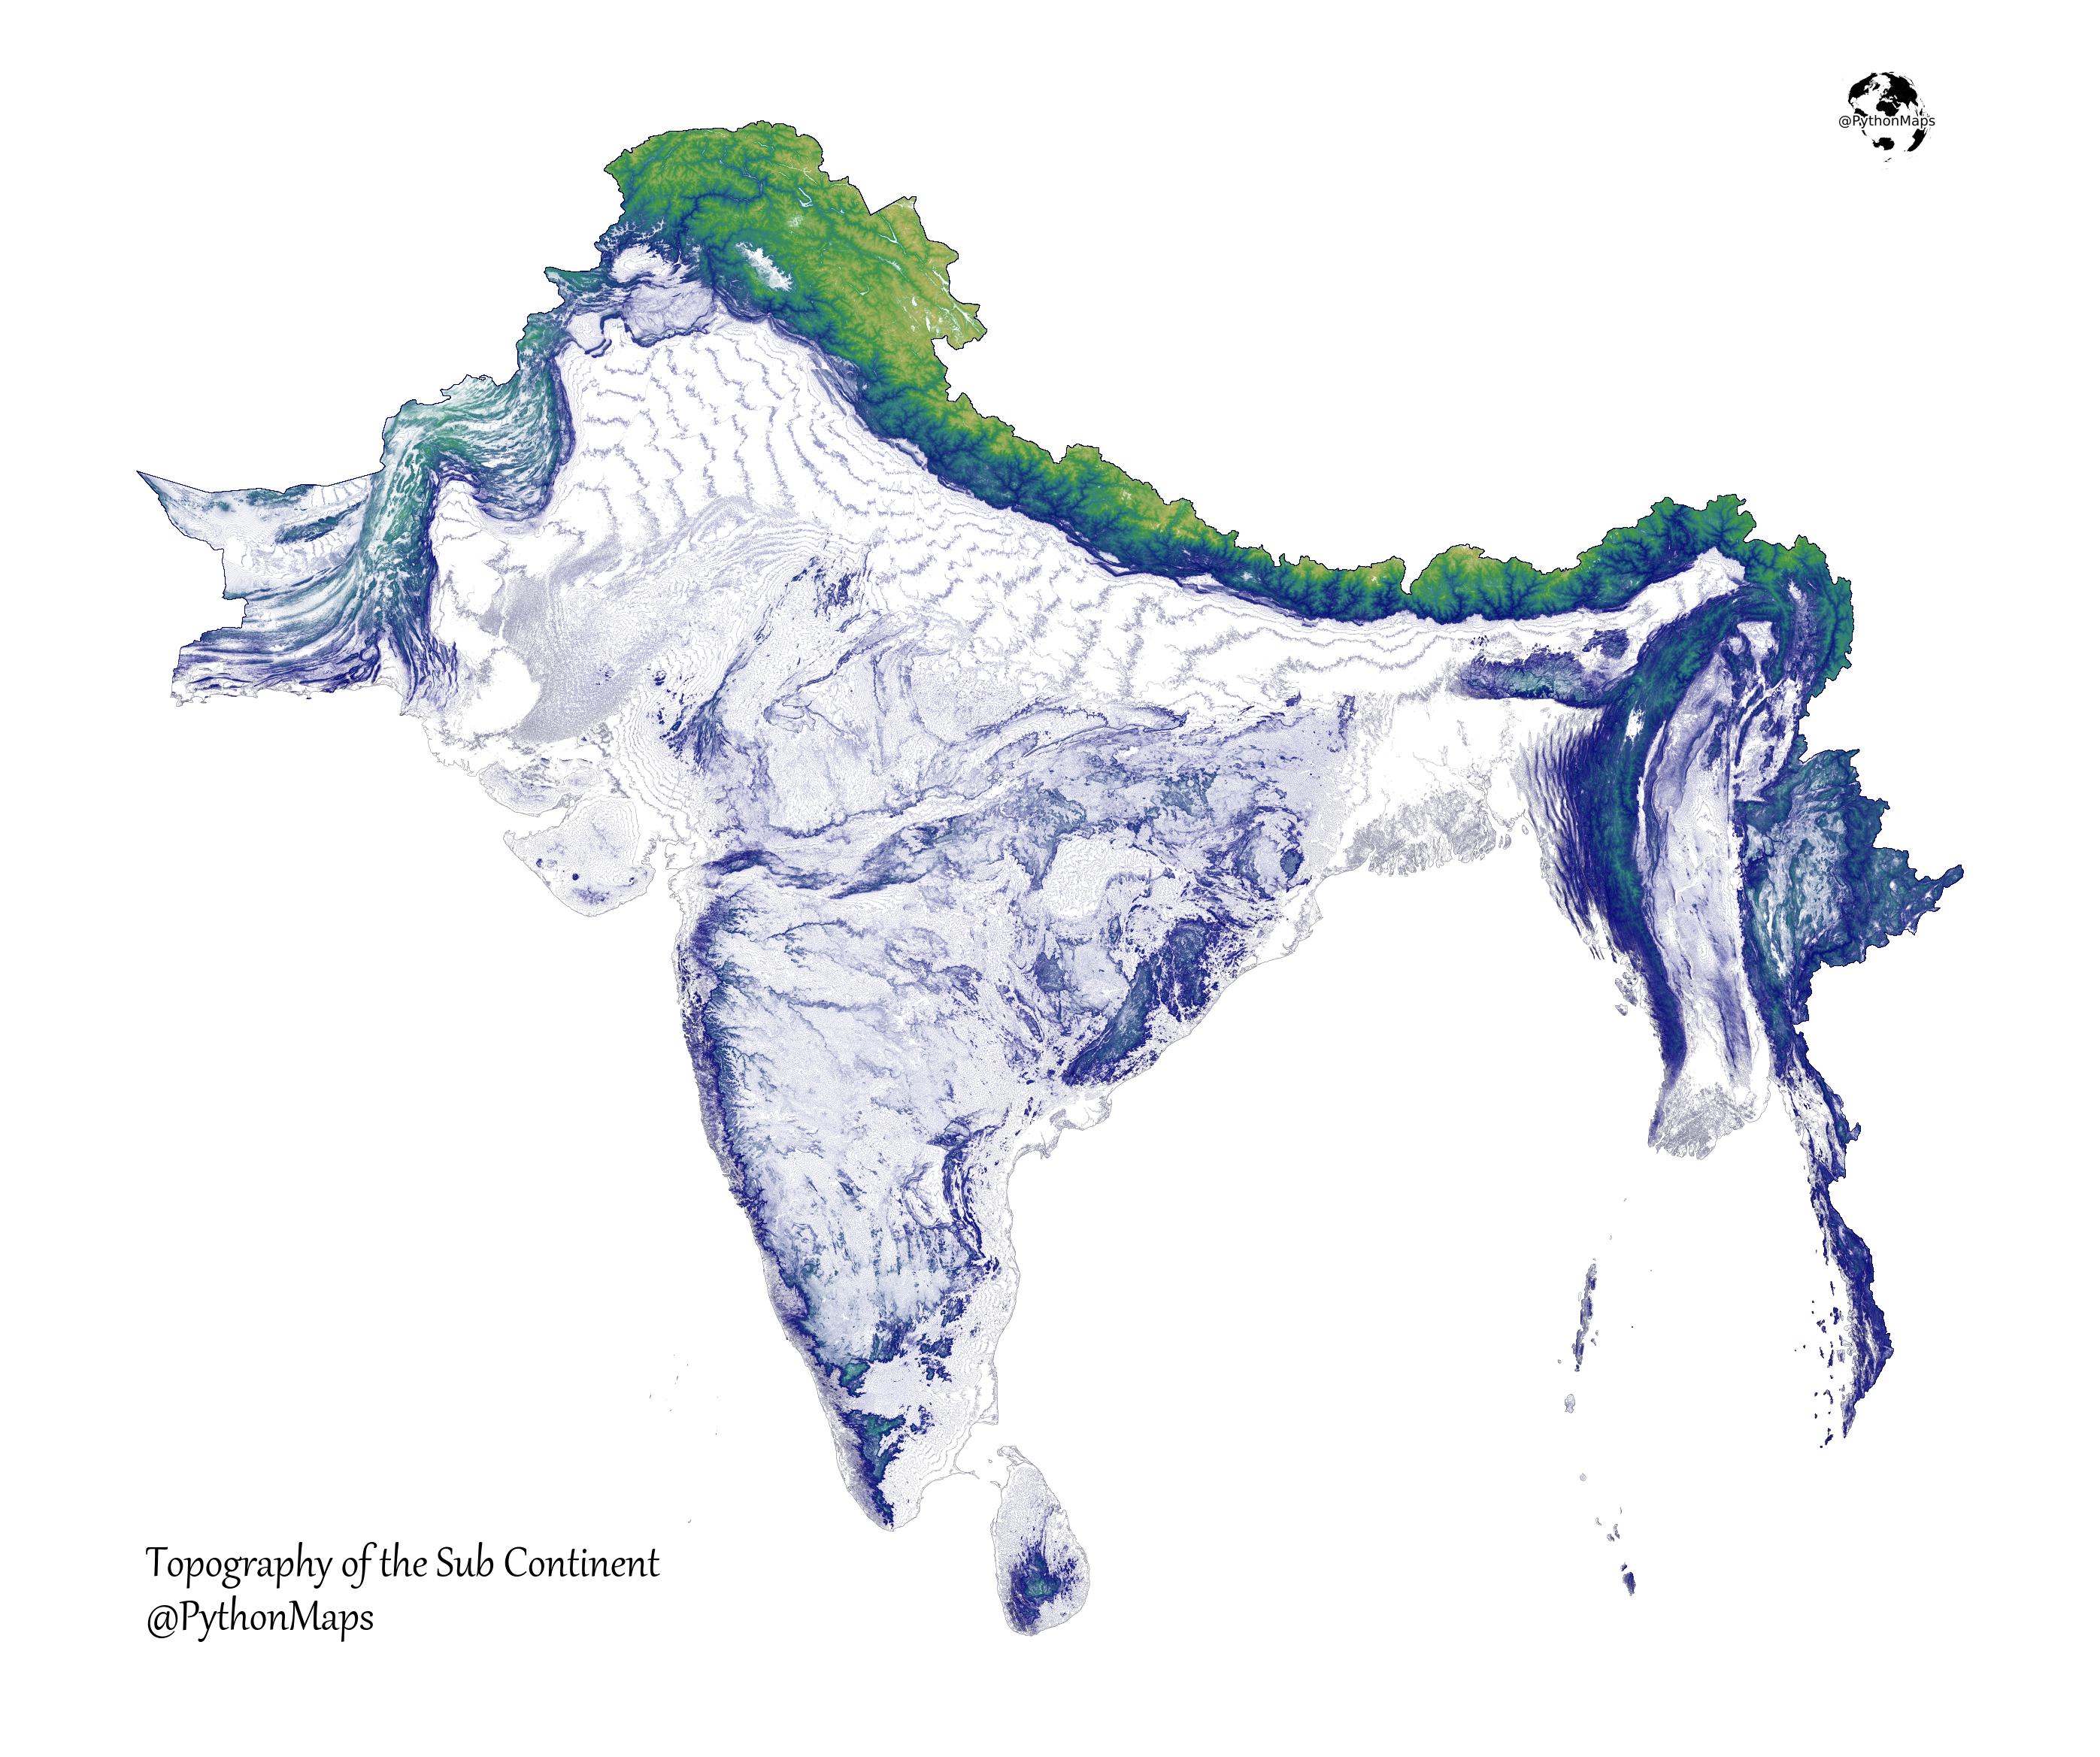 Topography of the Sub Continent